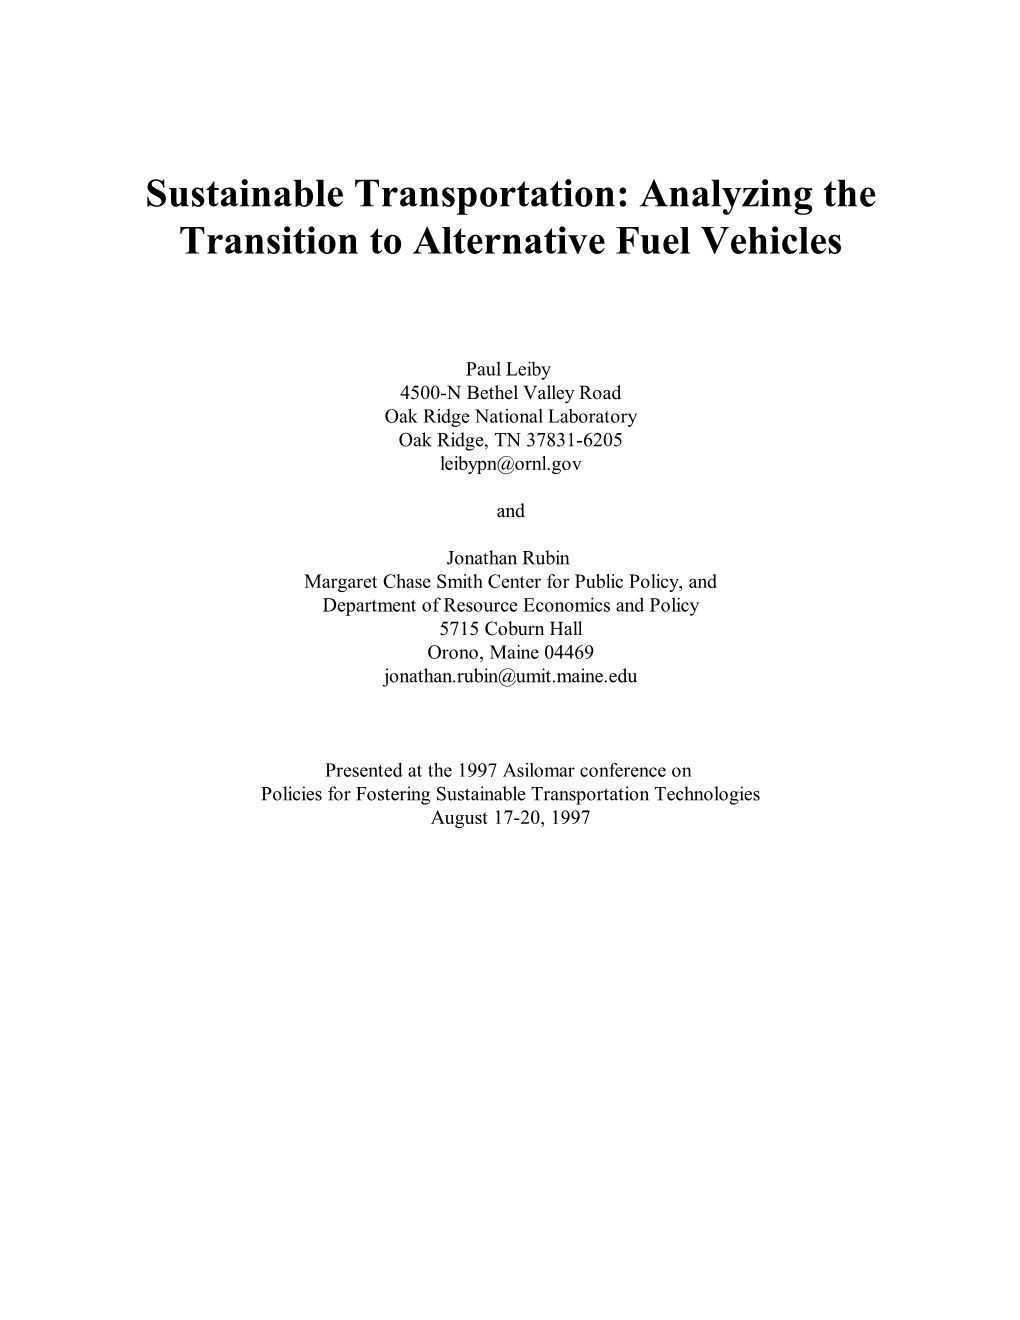 Sustainable Transportation: Analyzing the Transition to Alternative Fuel Vehicles